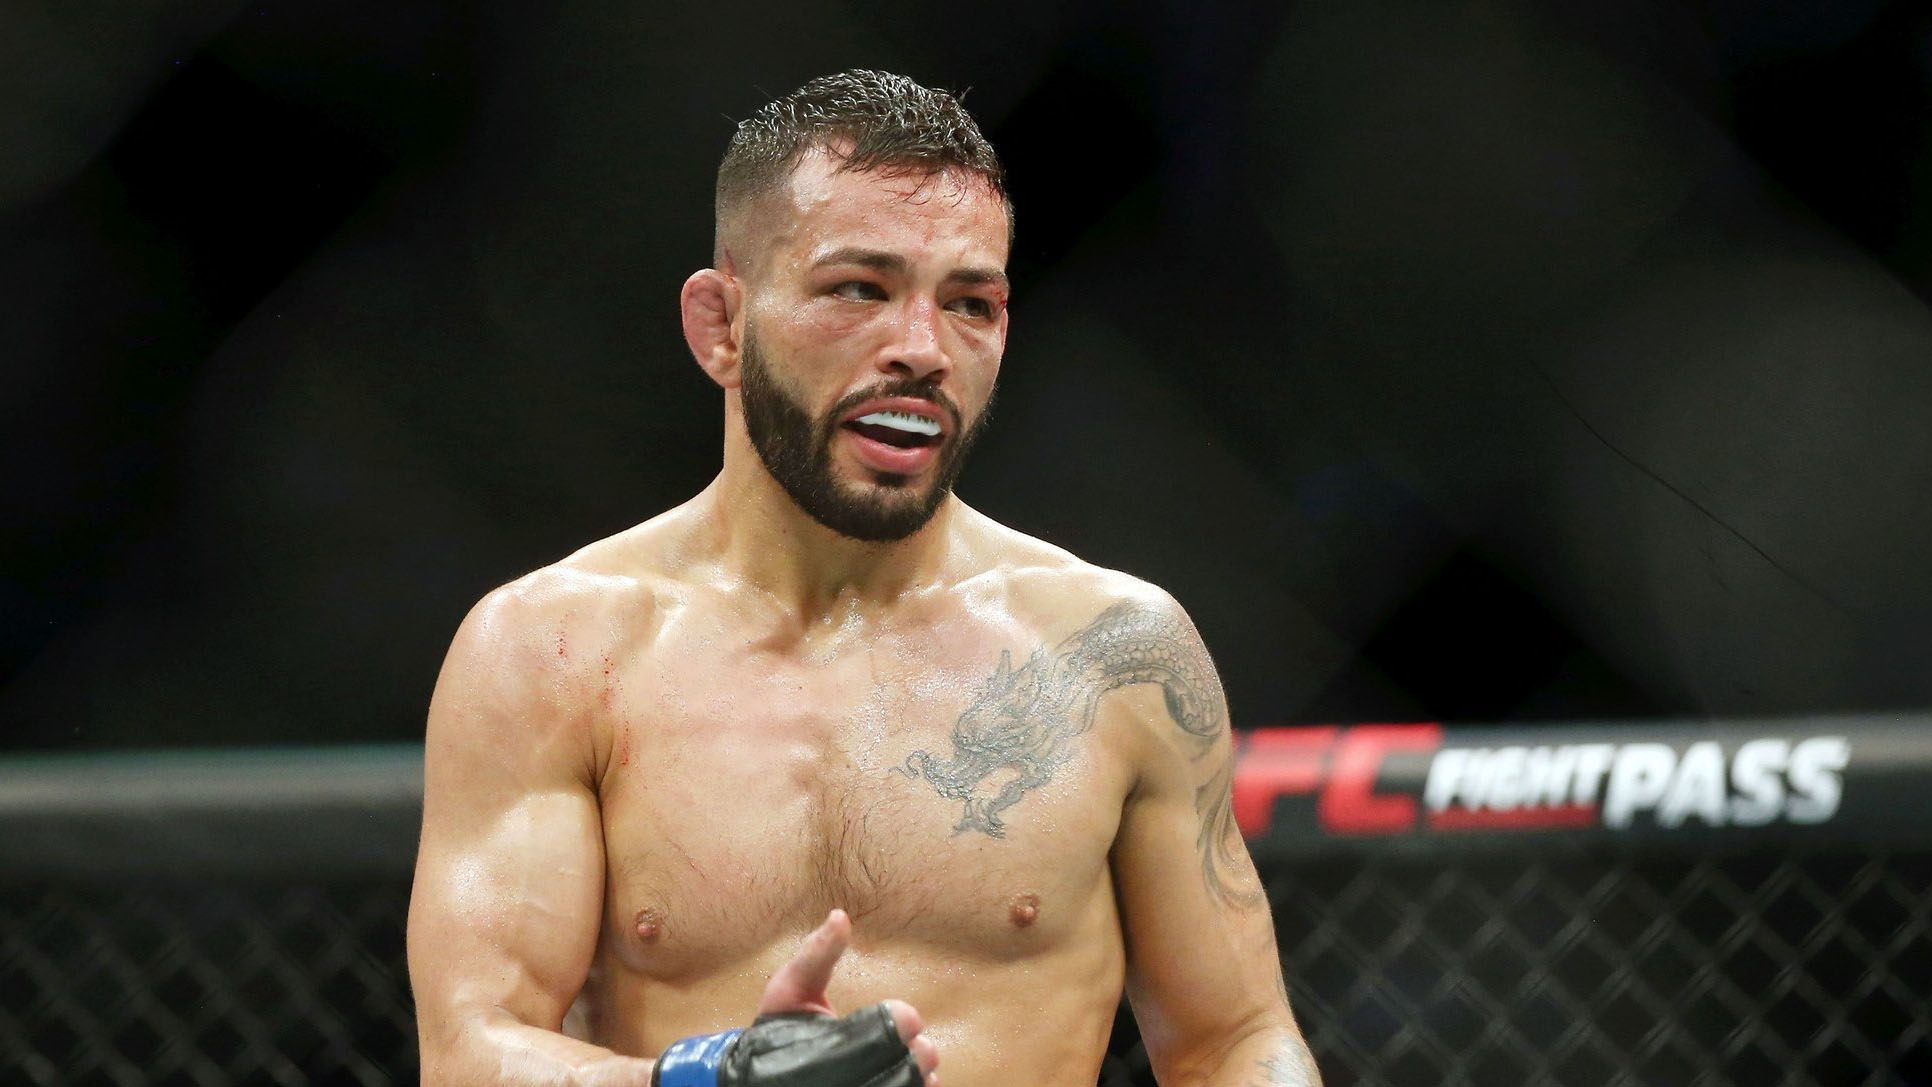 Dan Ige (born August 6, 1991) is an American mixed martial artist currently competing in UFC's Featherweight division. A professional since 2014, he h...